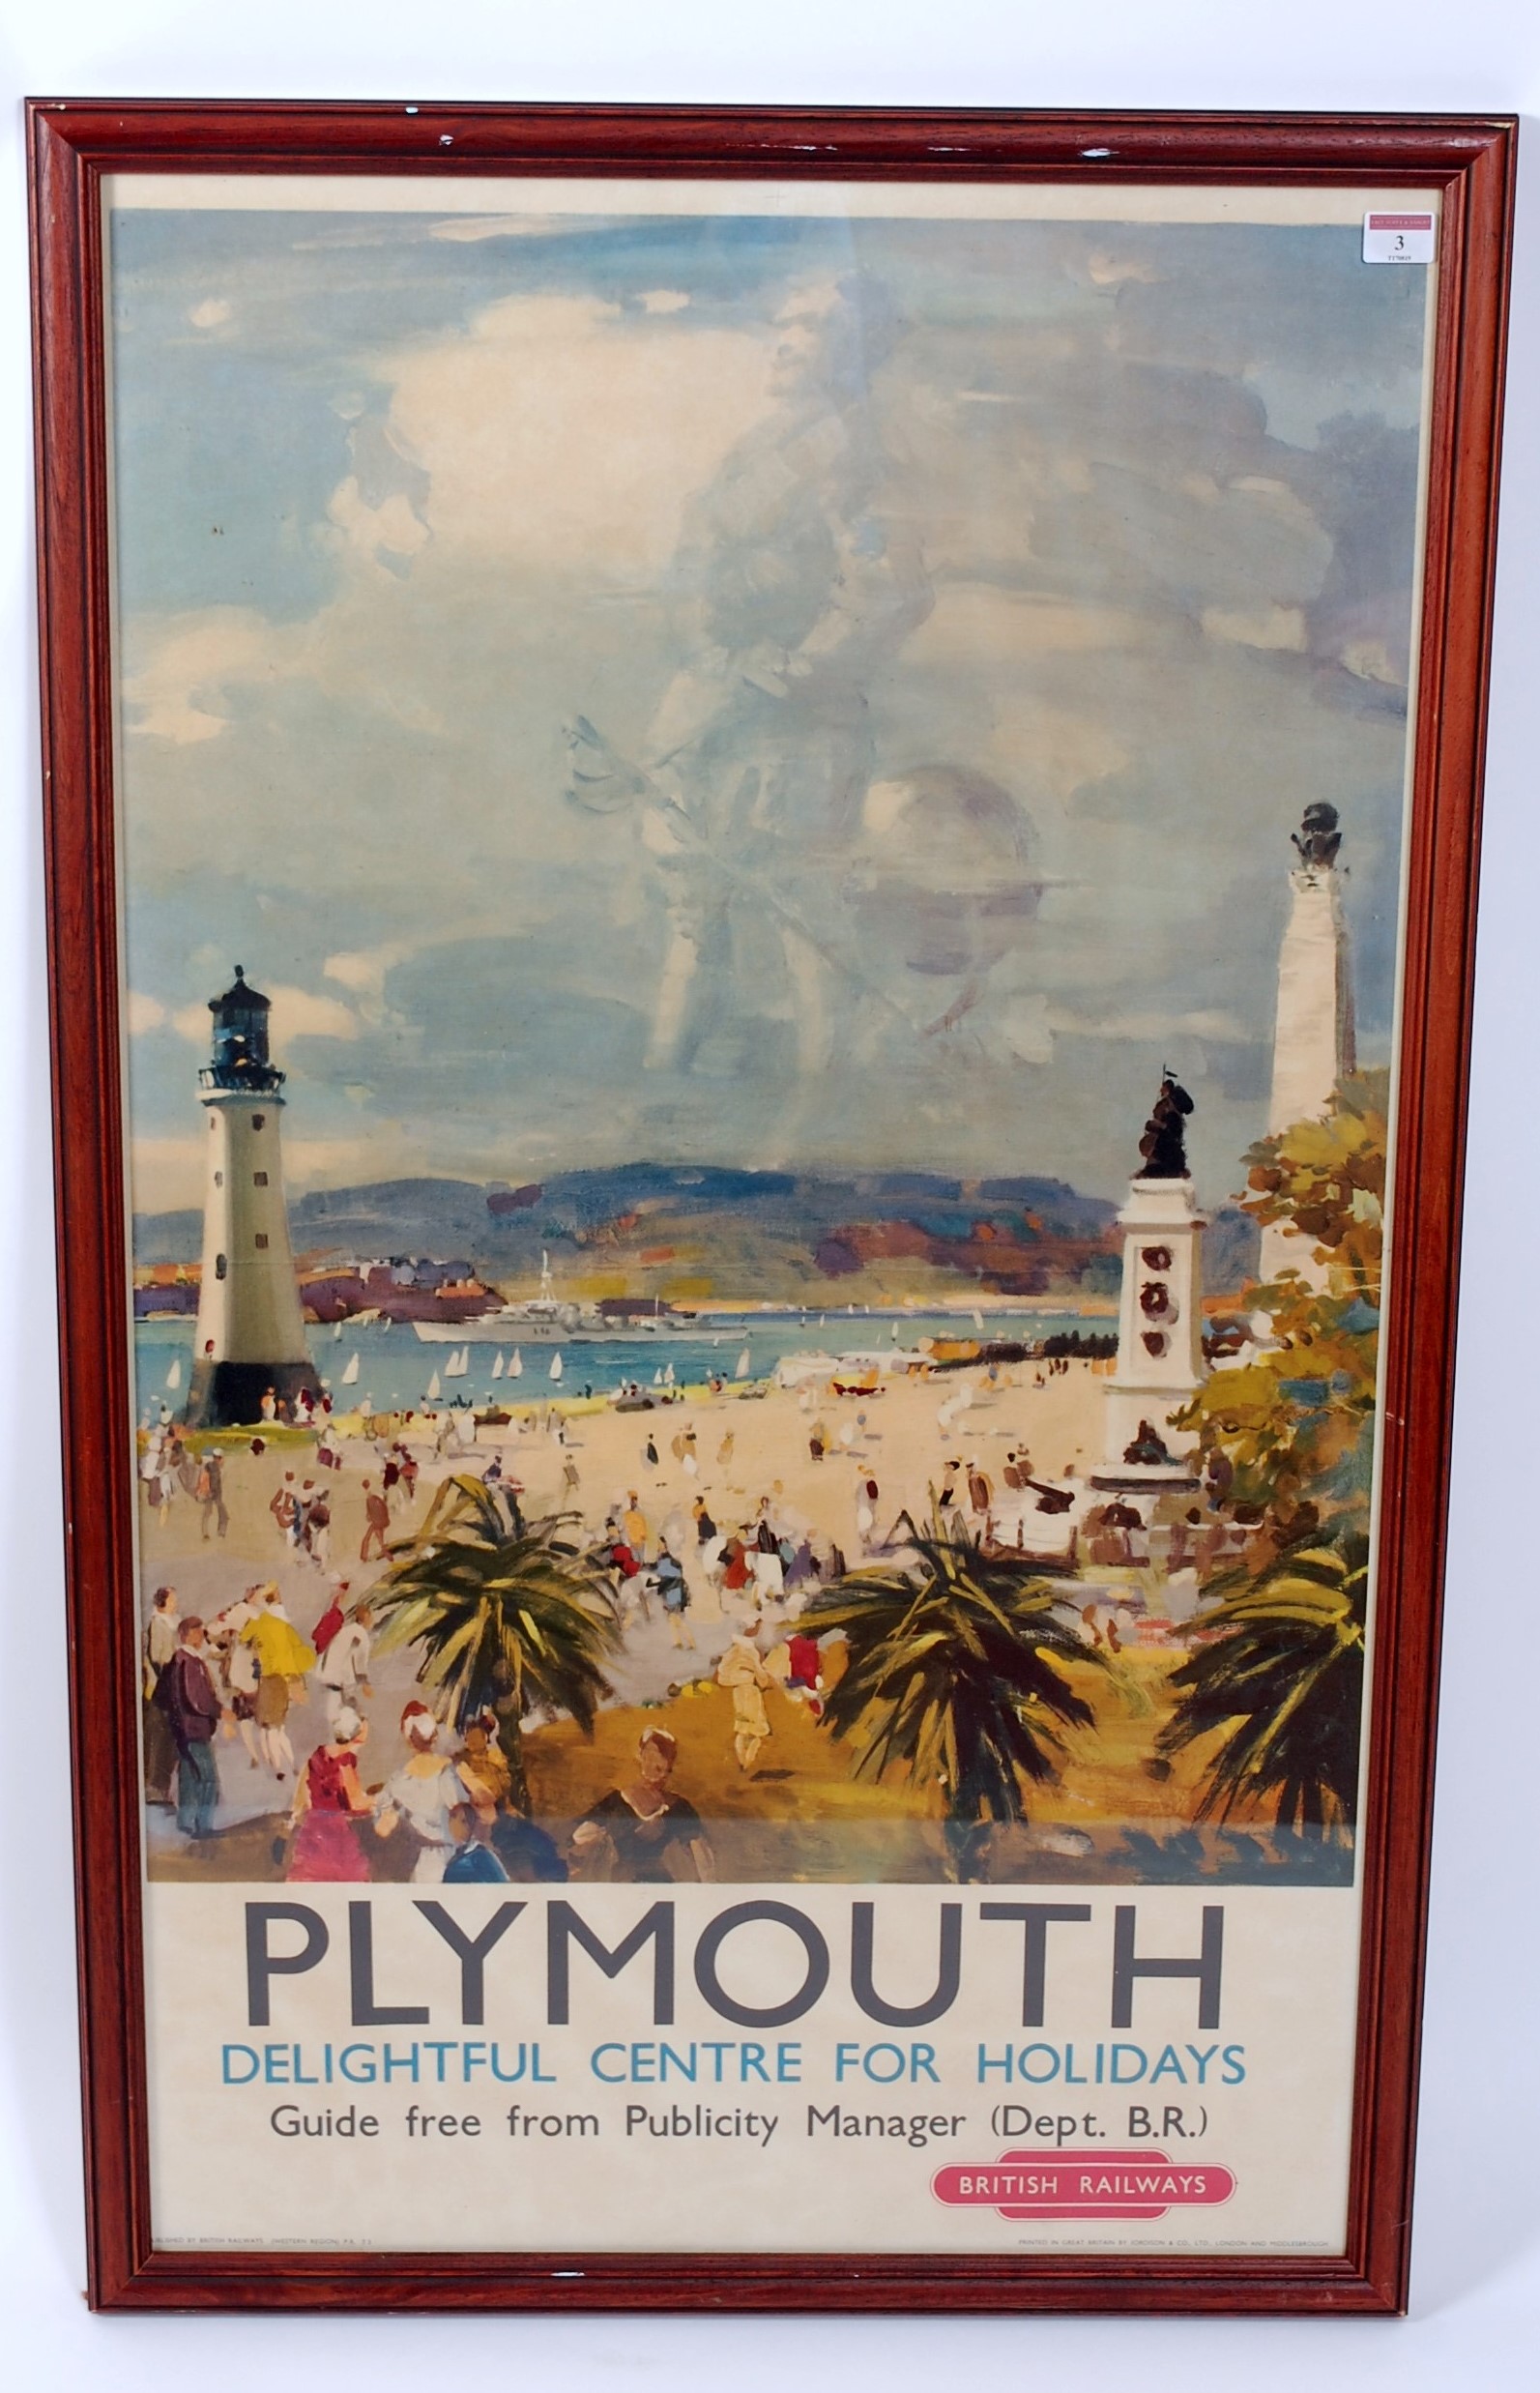 A BR Plymouth Double Royal railway poster depicting the Plymouth coast as printed in Great Britain